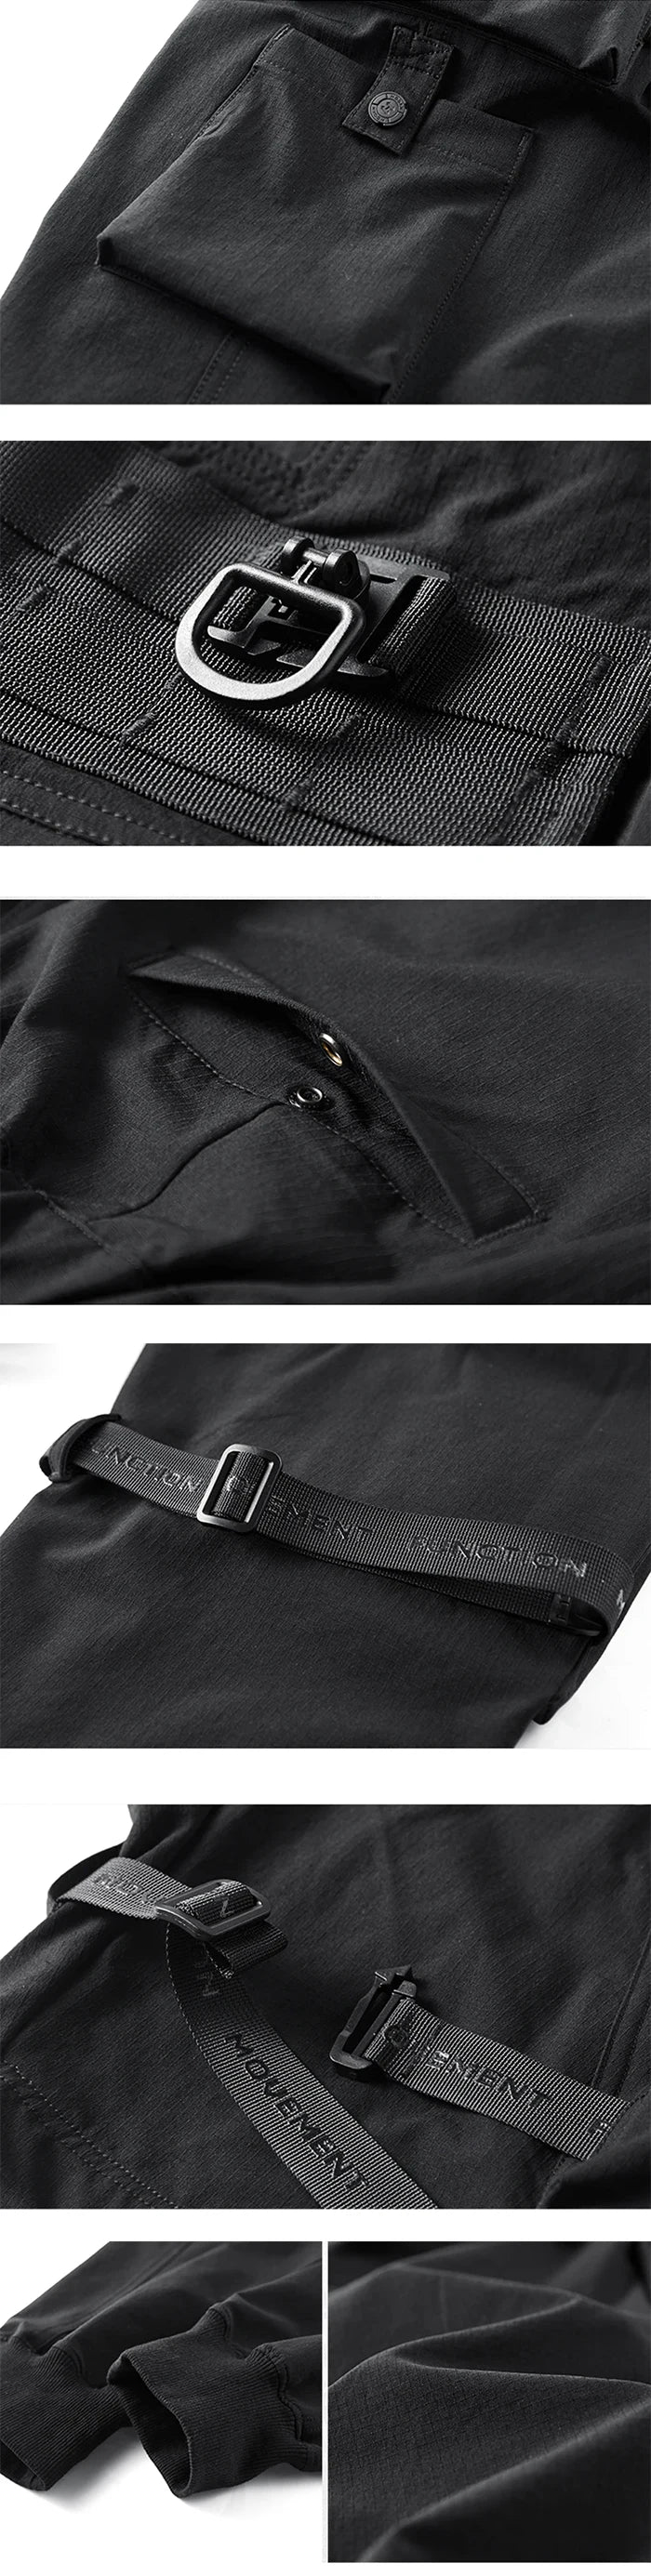 more details of the Black cargo pants techwear "Futtsu"